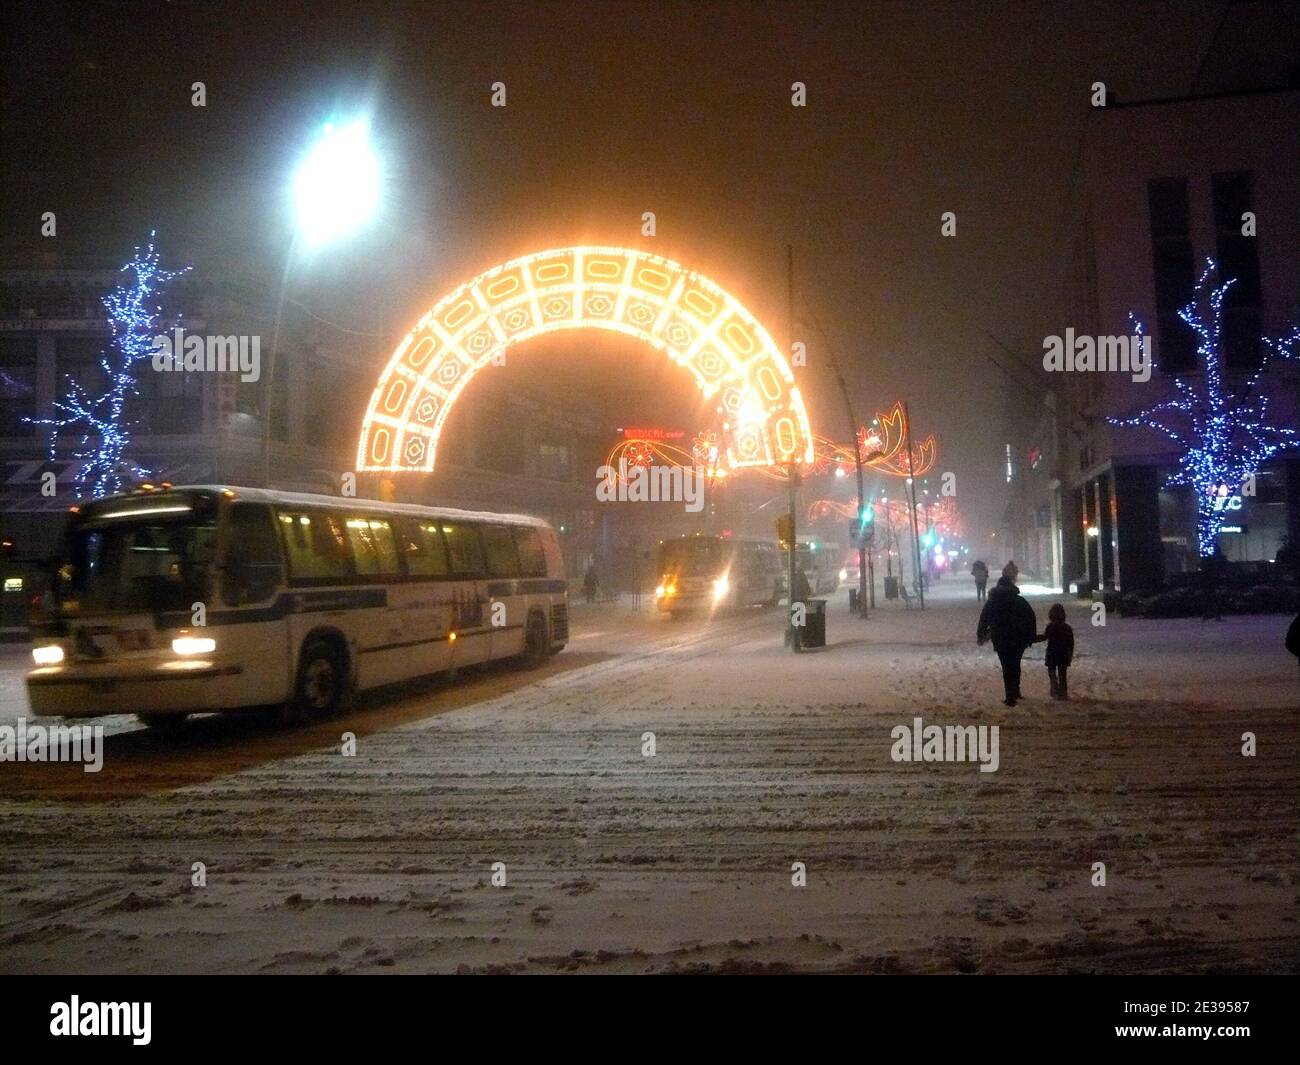 Illustration of Downtown Brooklyn in New York during the first snowfall of the year on December 26, 2010. A winter storm blizzard dropped around 20 inches of snow in the U.S. East Coast. Photo by Charles Guerin/ABACAPRESS.COM Stock Photo